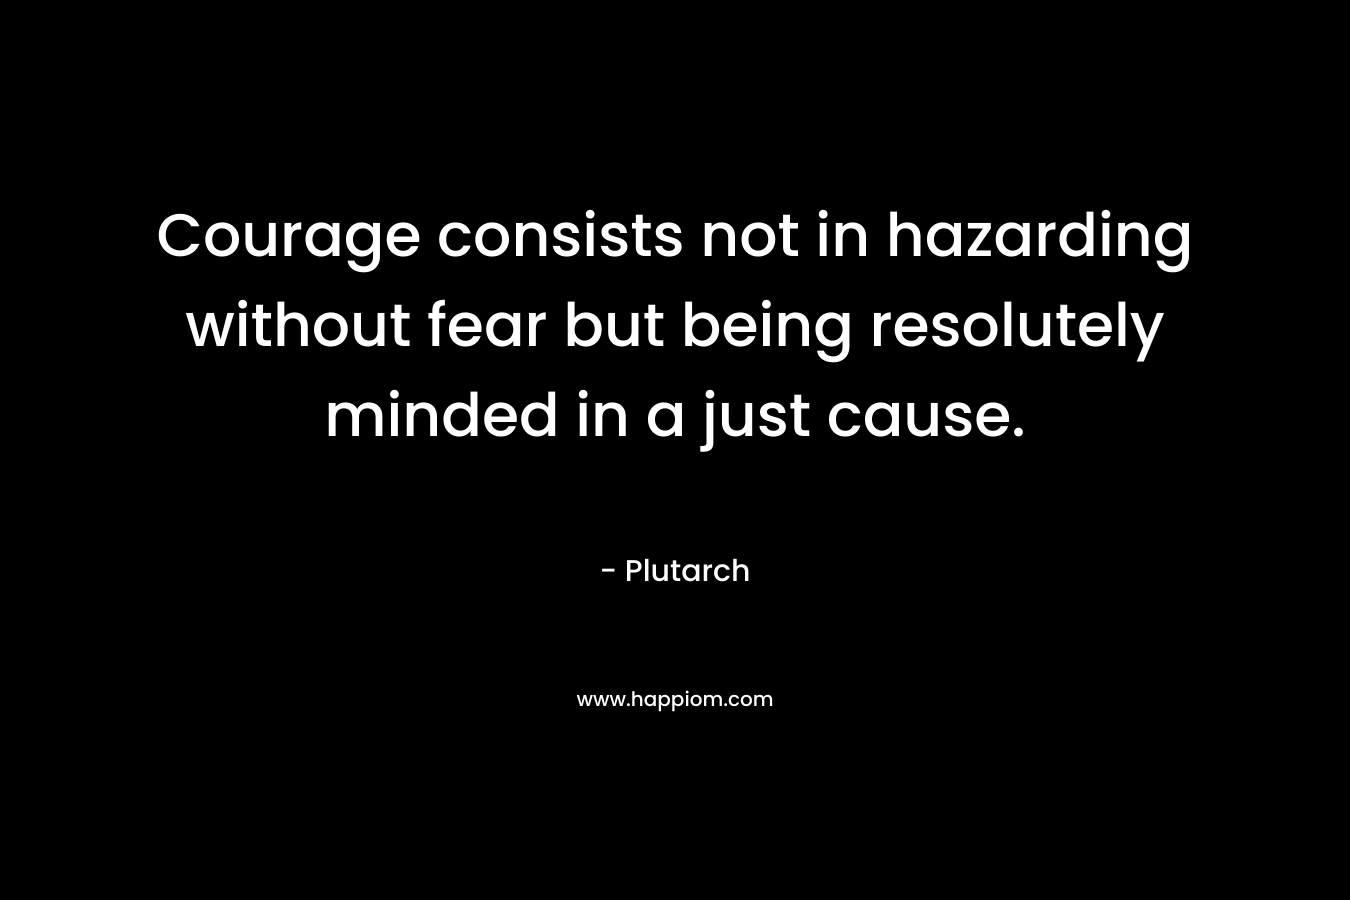 Courage consists not in hazarding without fear but being resolutely minded in a just cause.  – Plutarch